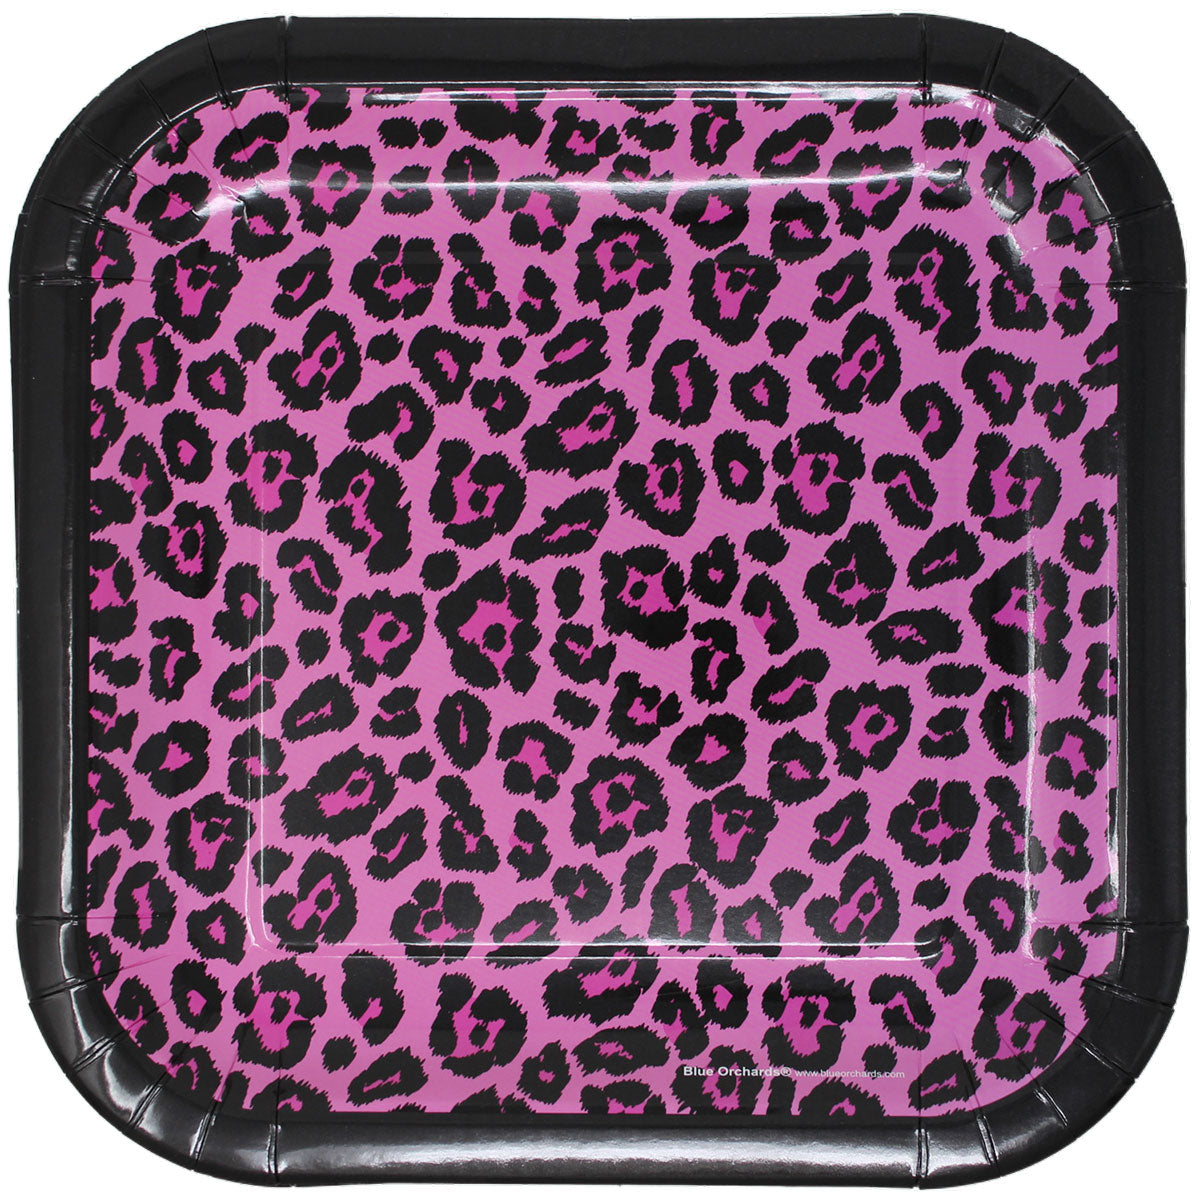  pink leopard party supplies packs